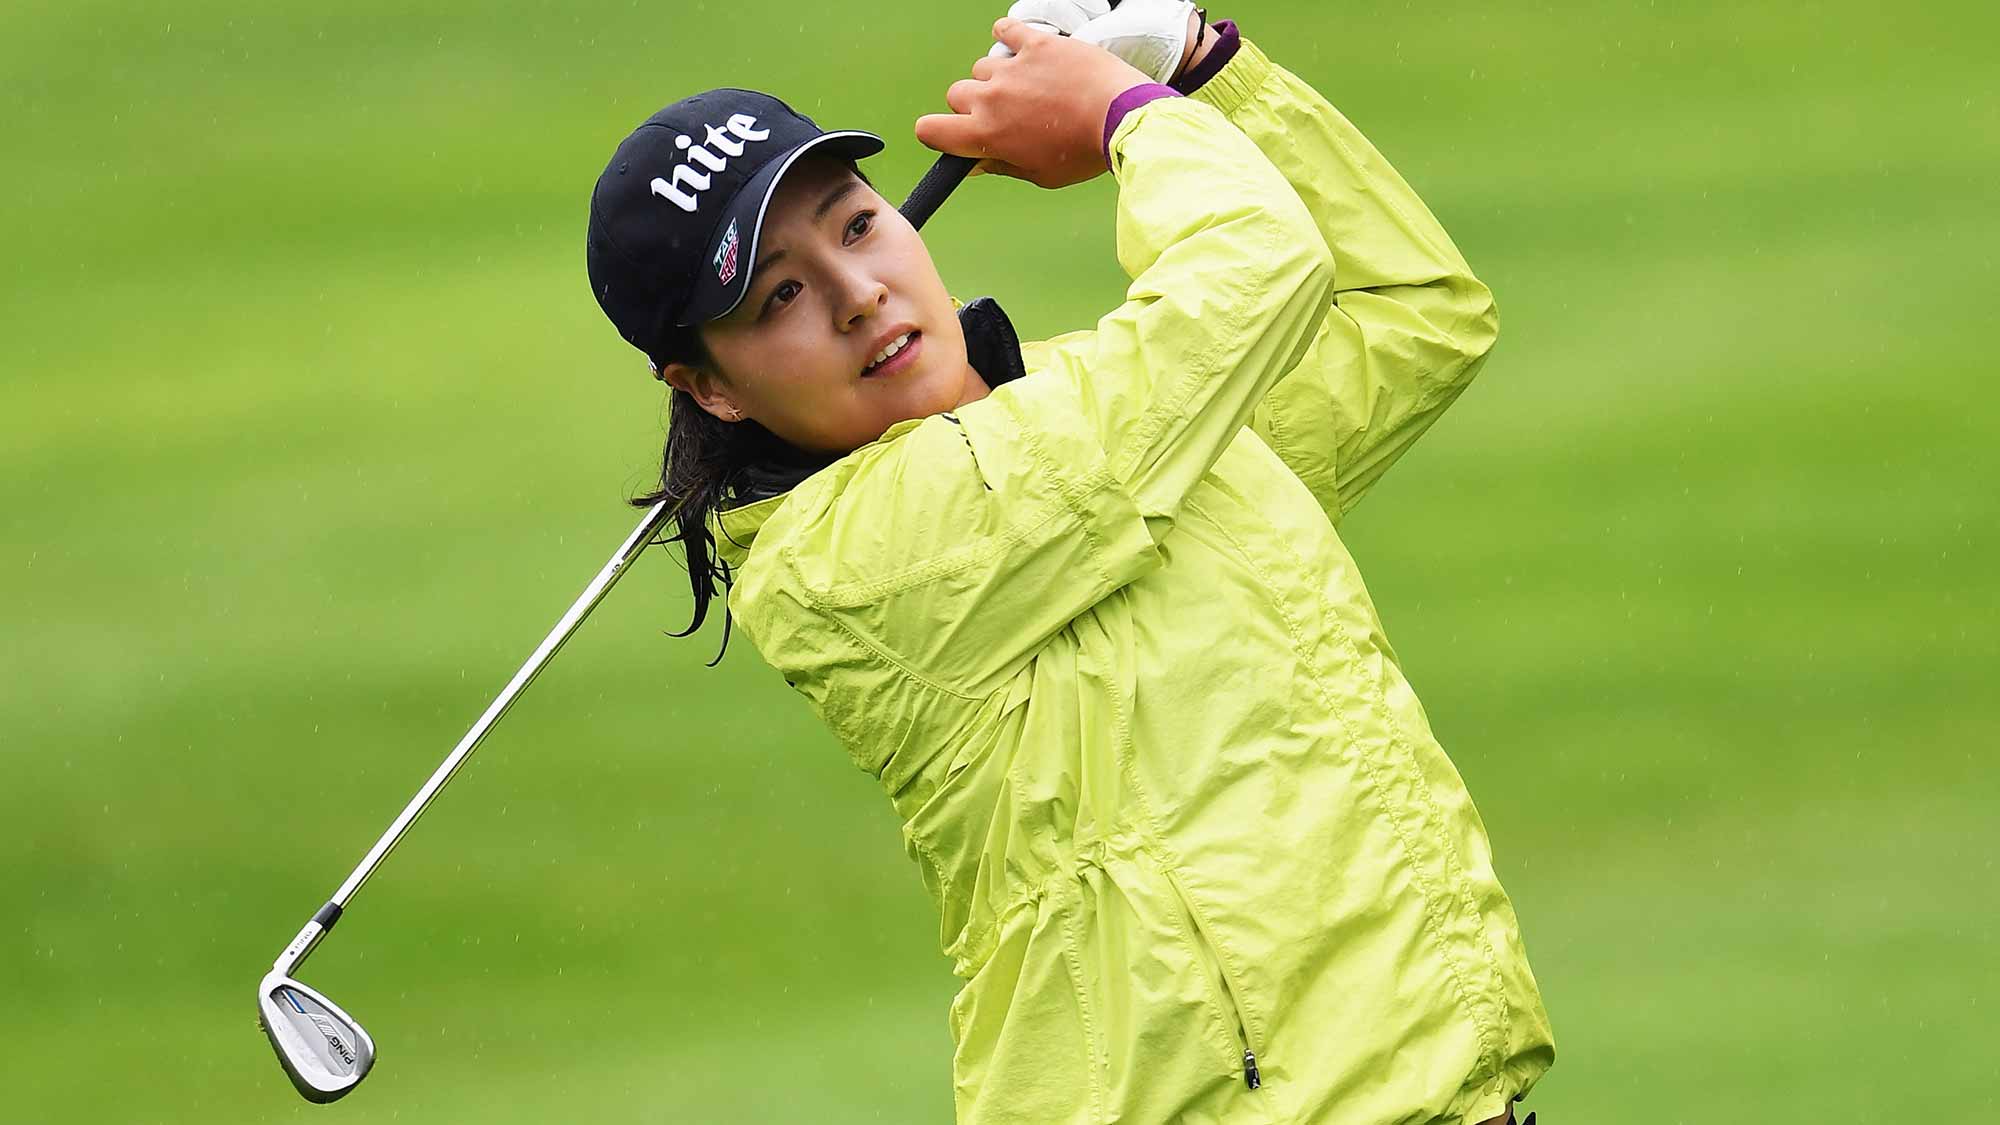 In Gee Chun of Korea plays a shot during the final round of The Evian Championship